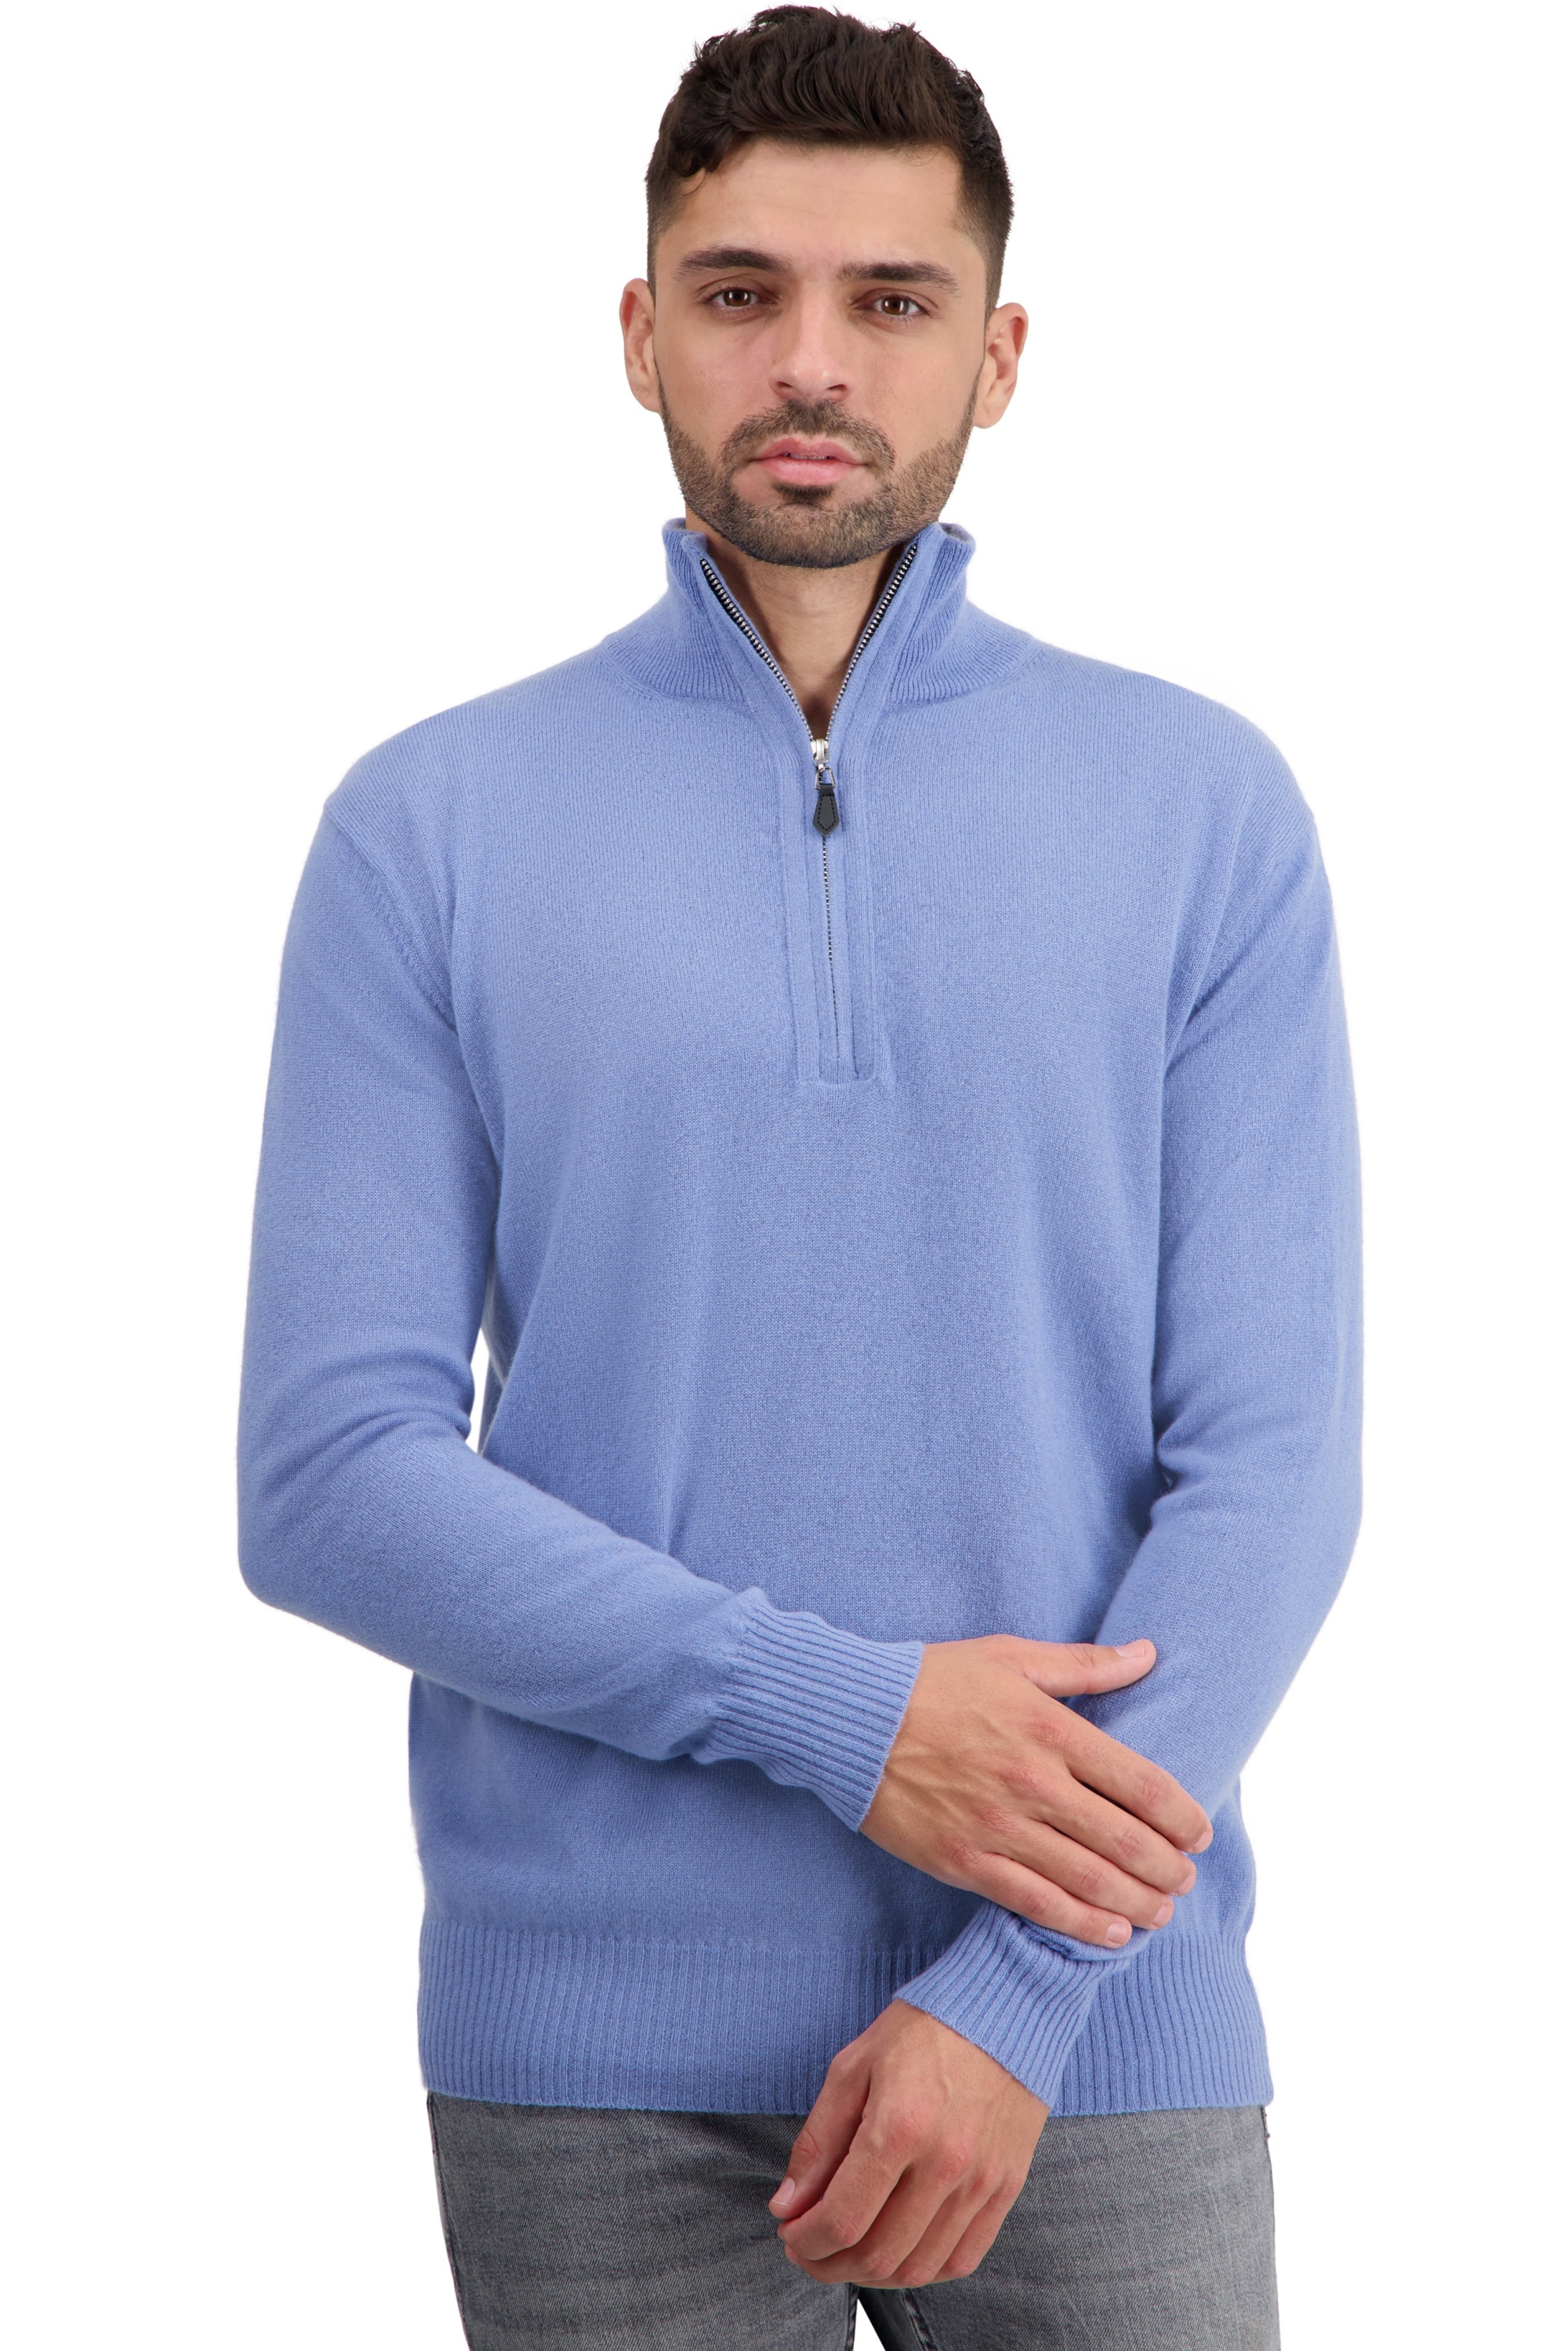 Cashmere men basic sweaters at low prices toulon first light blue m